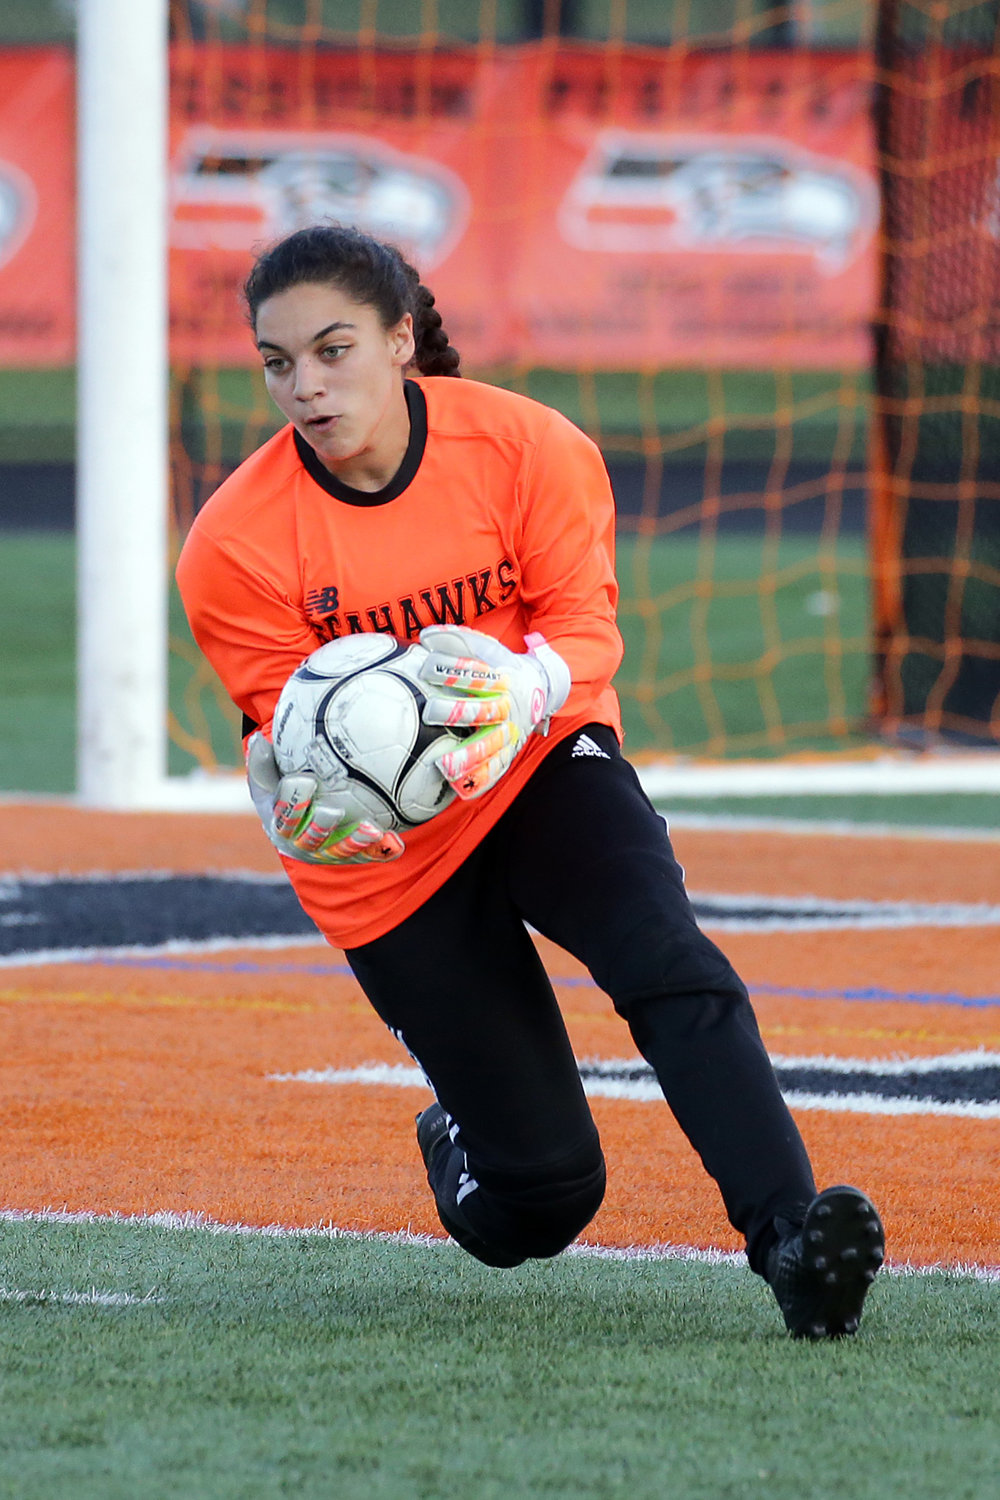 Junior goalkeeper Vanessa DeCastro recorded four shutouts through the Seahawks’ first five games, allowing just one goal in the other.